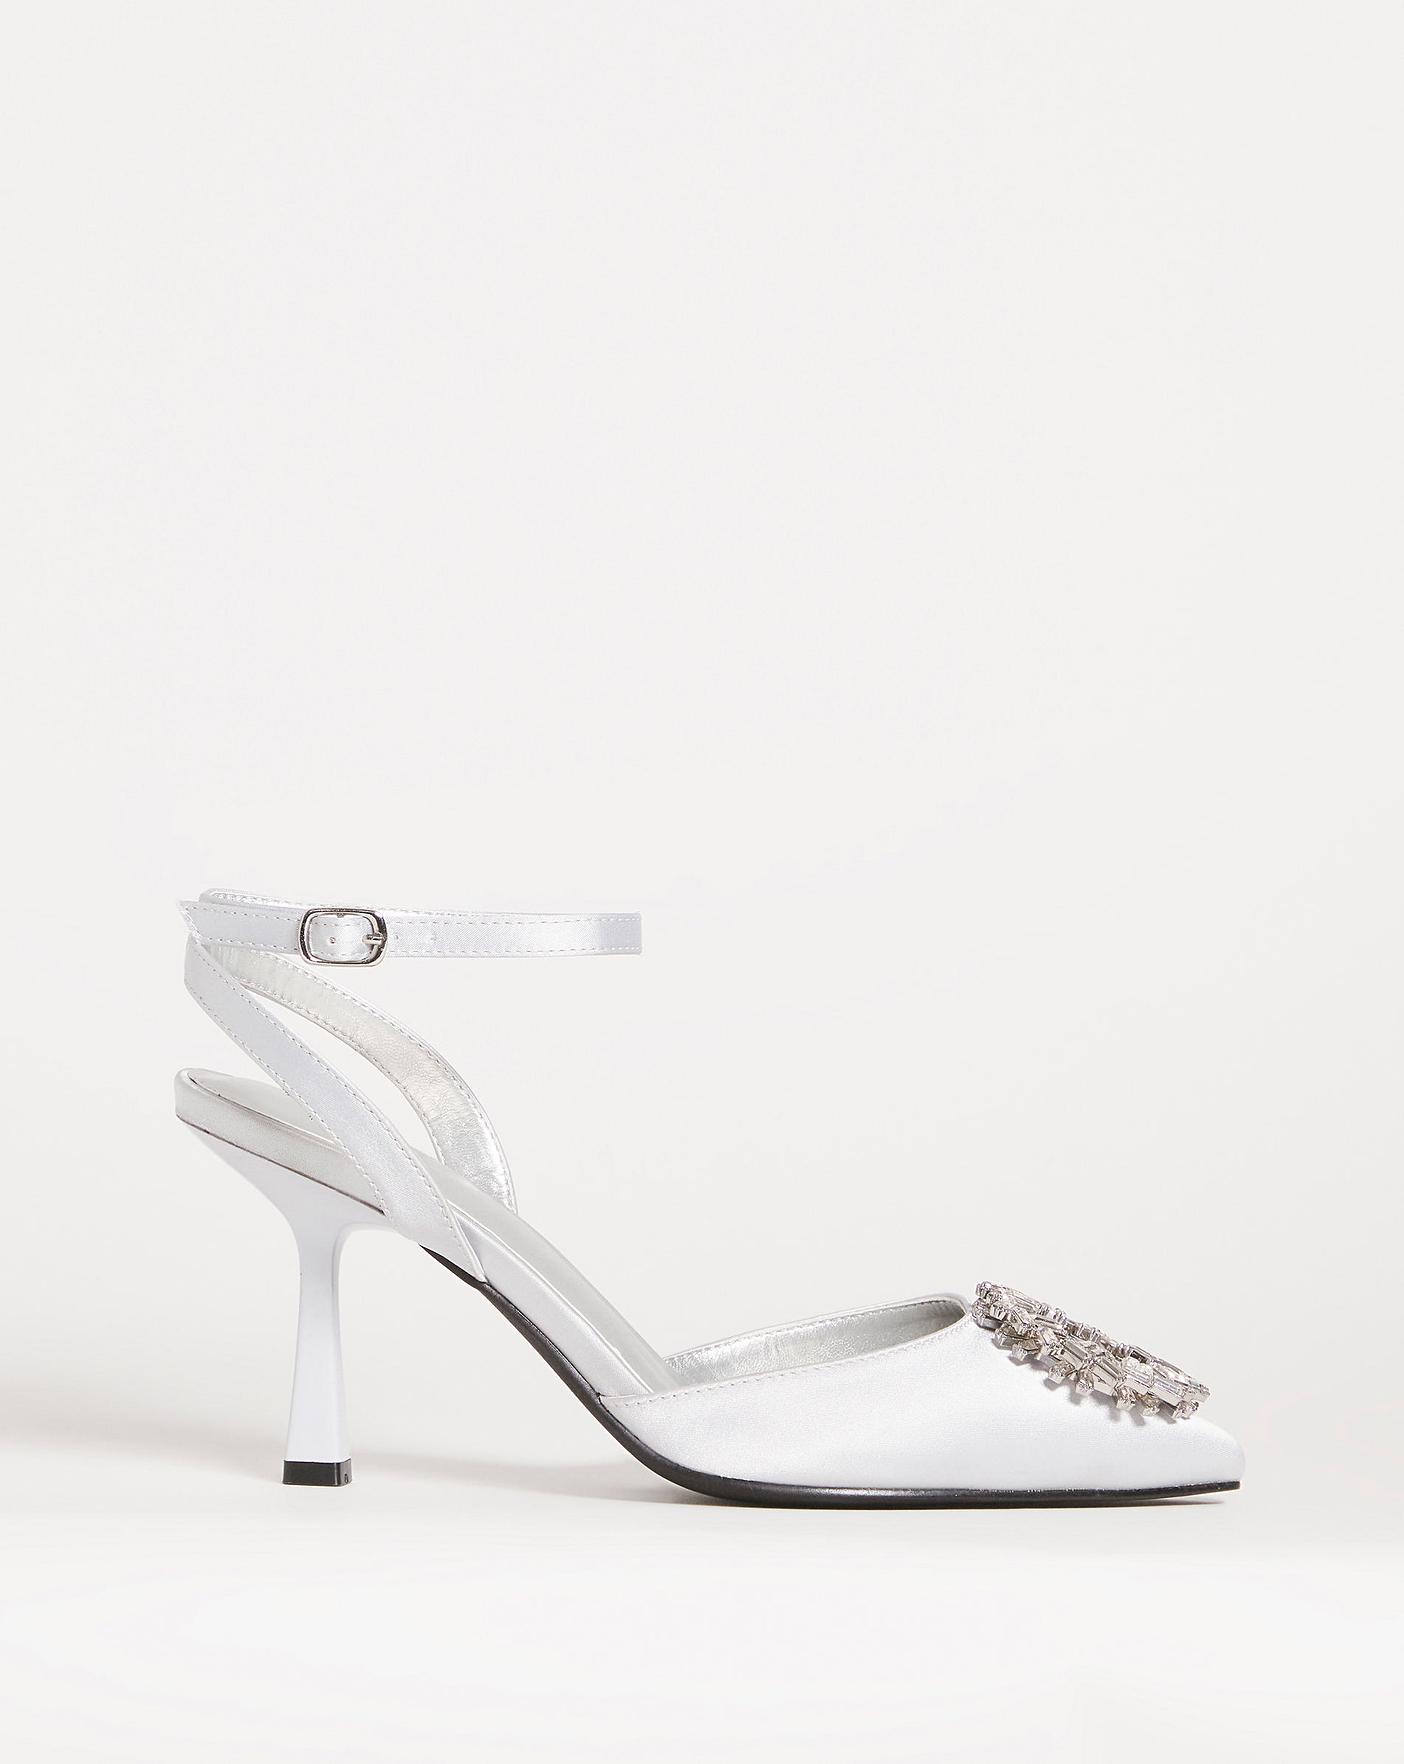 Yours Limited Collection Silver Metallic Platform Heels In Wide E Fit & Extra  Wide Eee Fit - Women's: Amazon.co.uk: Fashion